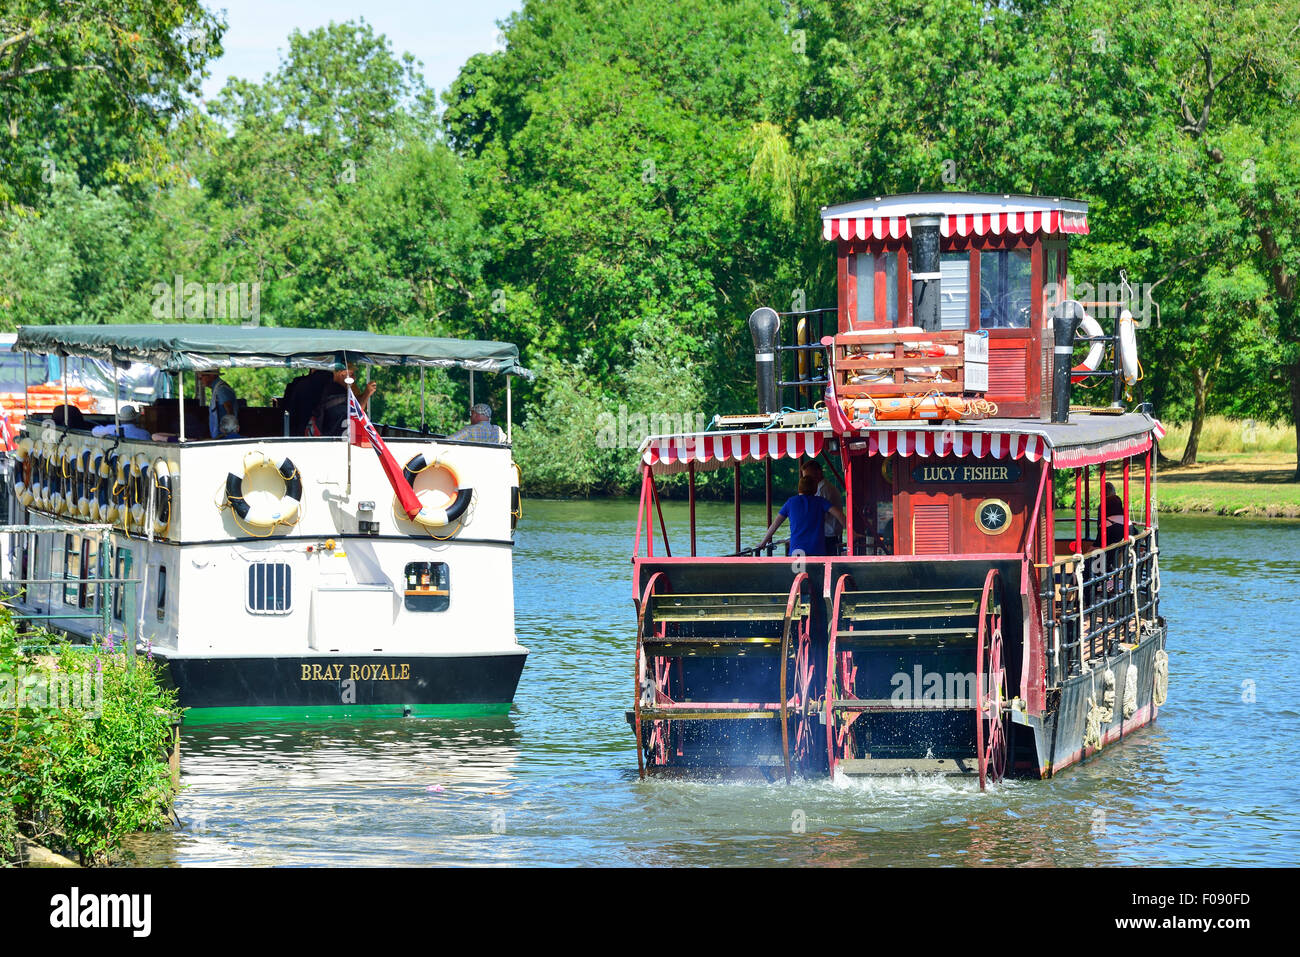 French Brothers 'Lucy Fisher' paddle steamer on River Thames, Runnymede, Surrey, England, United Kingdom Stock Photo